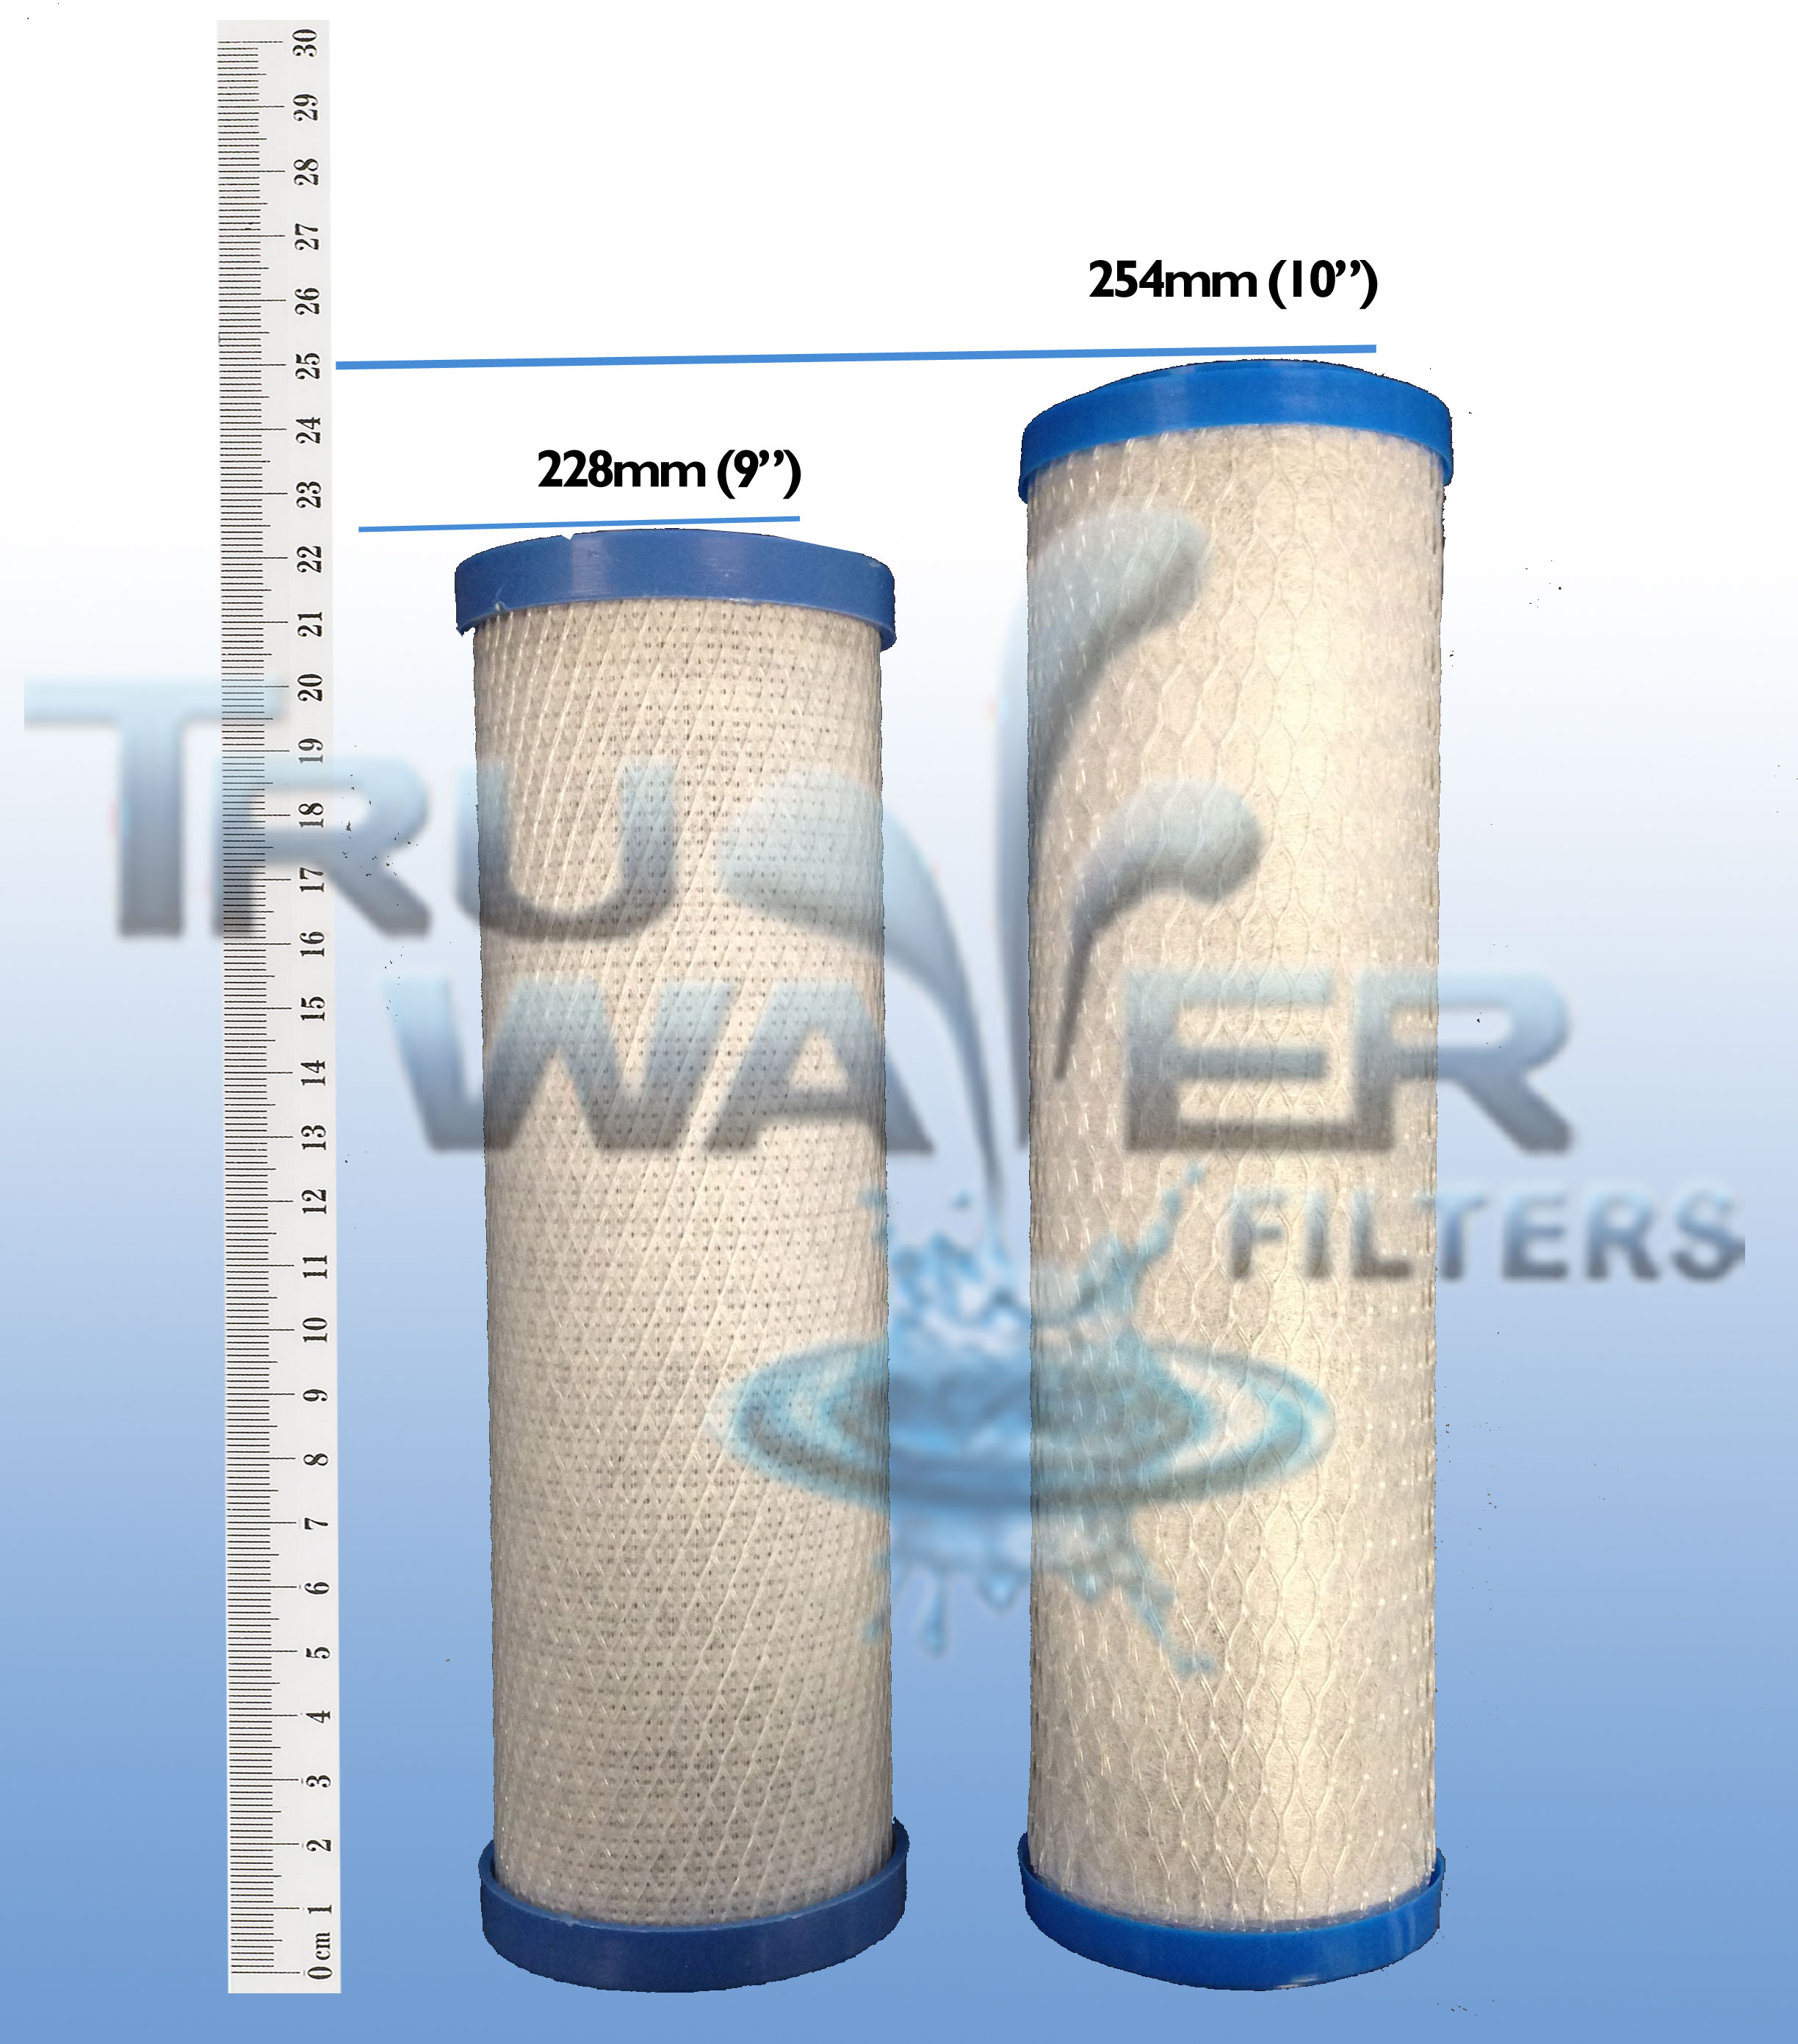 What size water filter do i have?